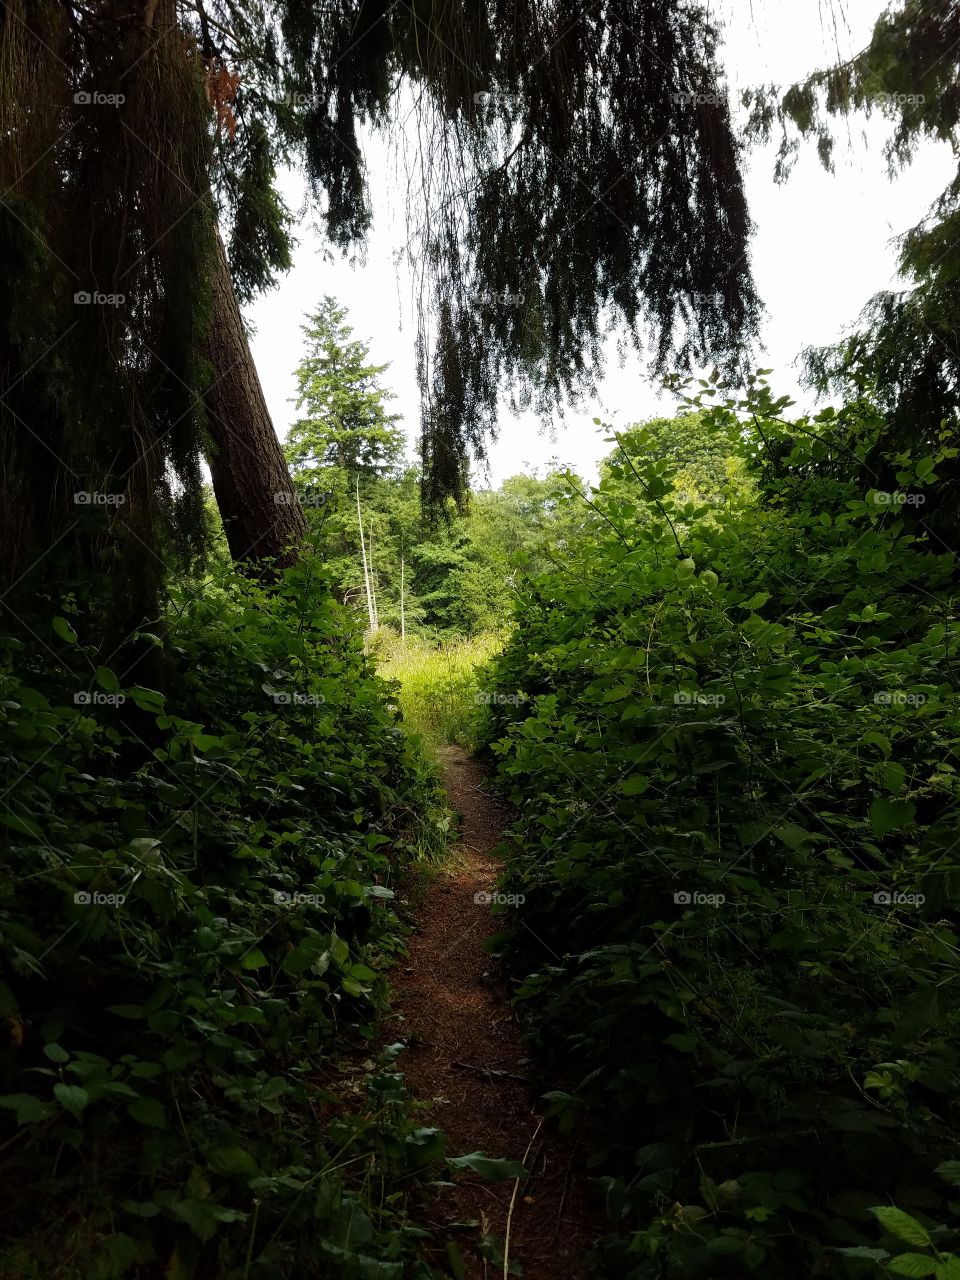 urban hiking through the forests of Discovery Park. Seattle, Washington 6/22/2016